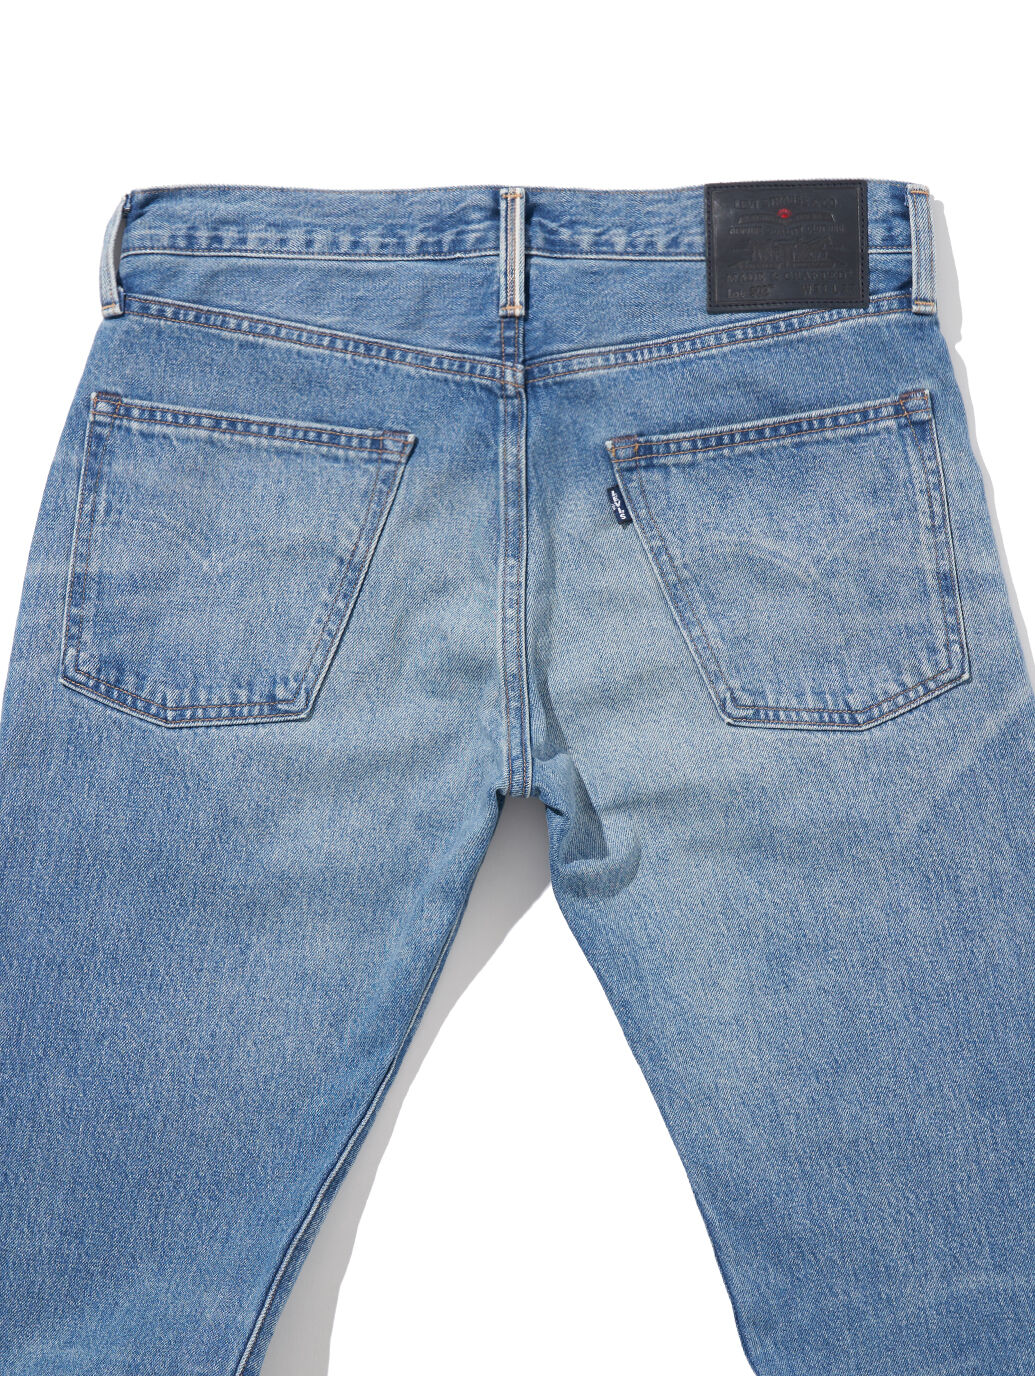 Levi's MADE&CRAFTED 502 TAPER FIT